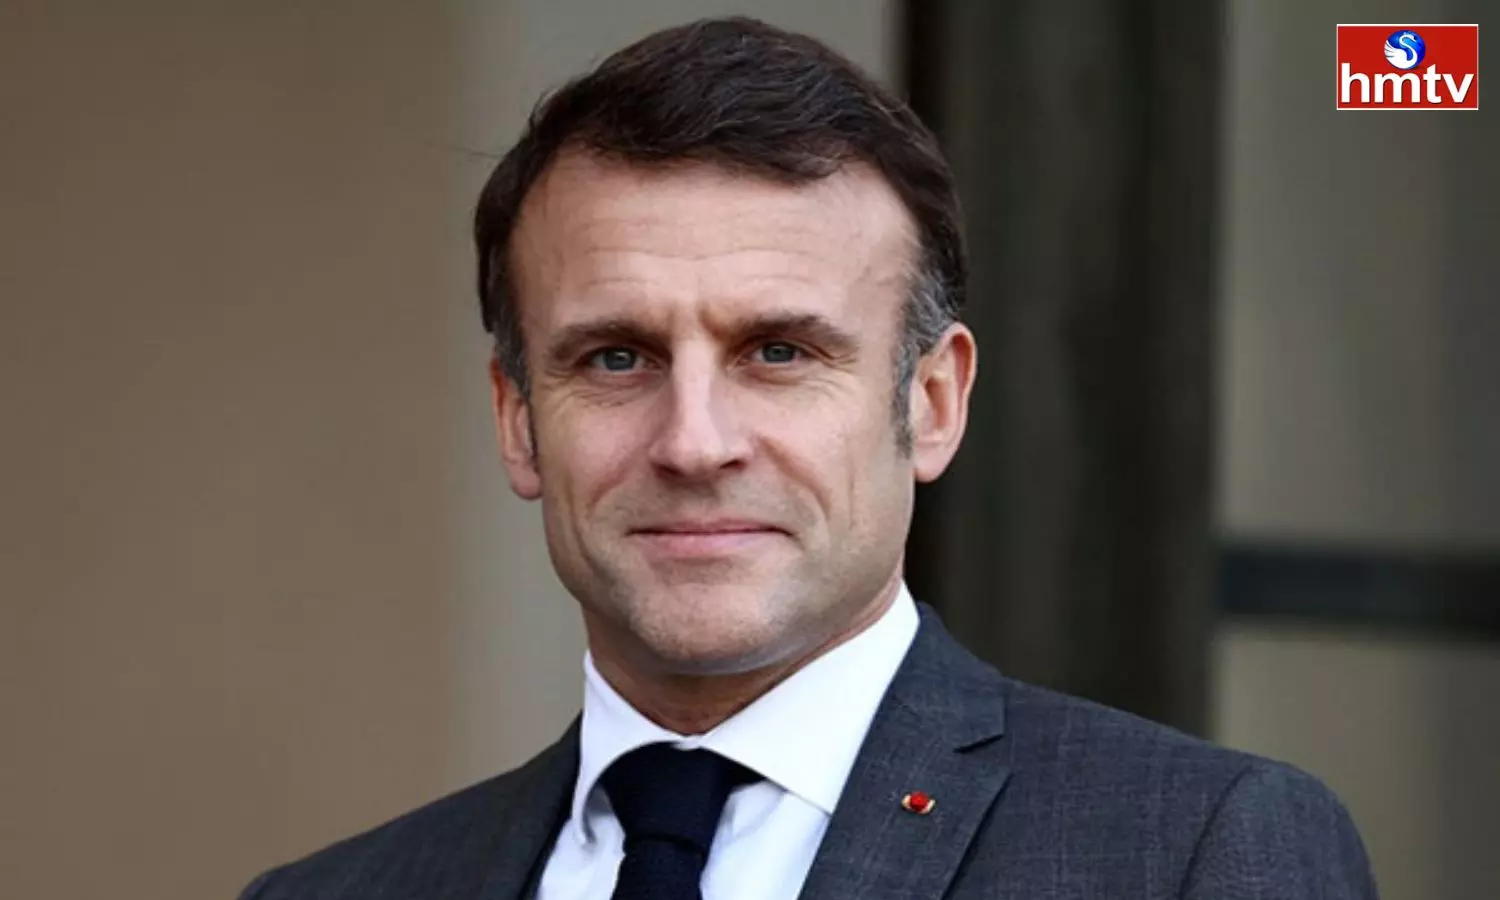 French President Emmanuel Macron will attend India